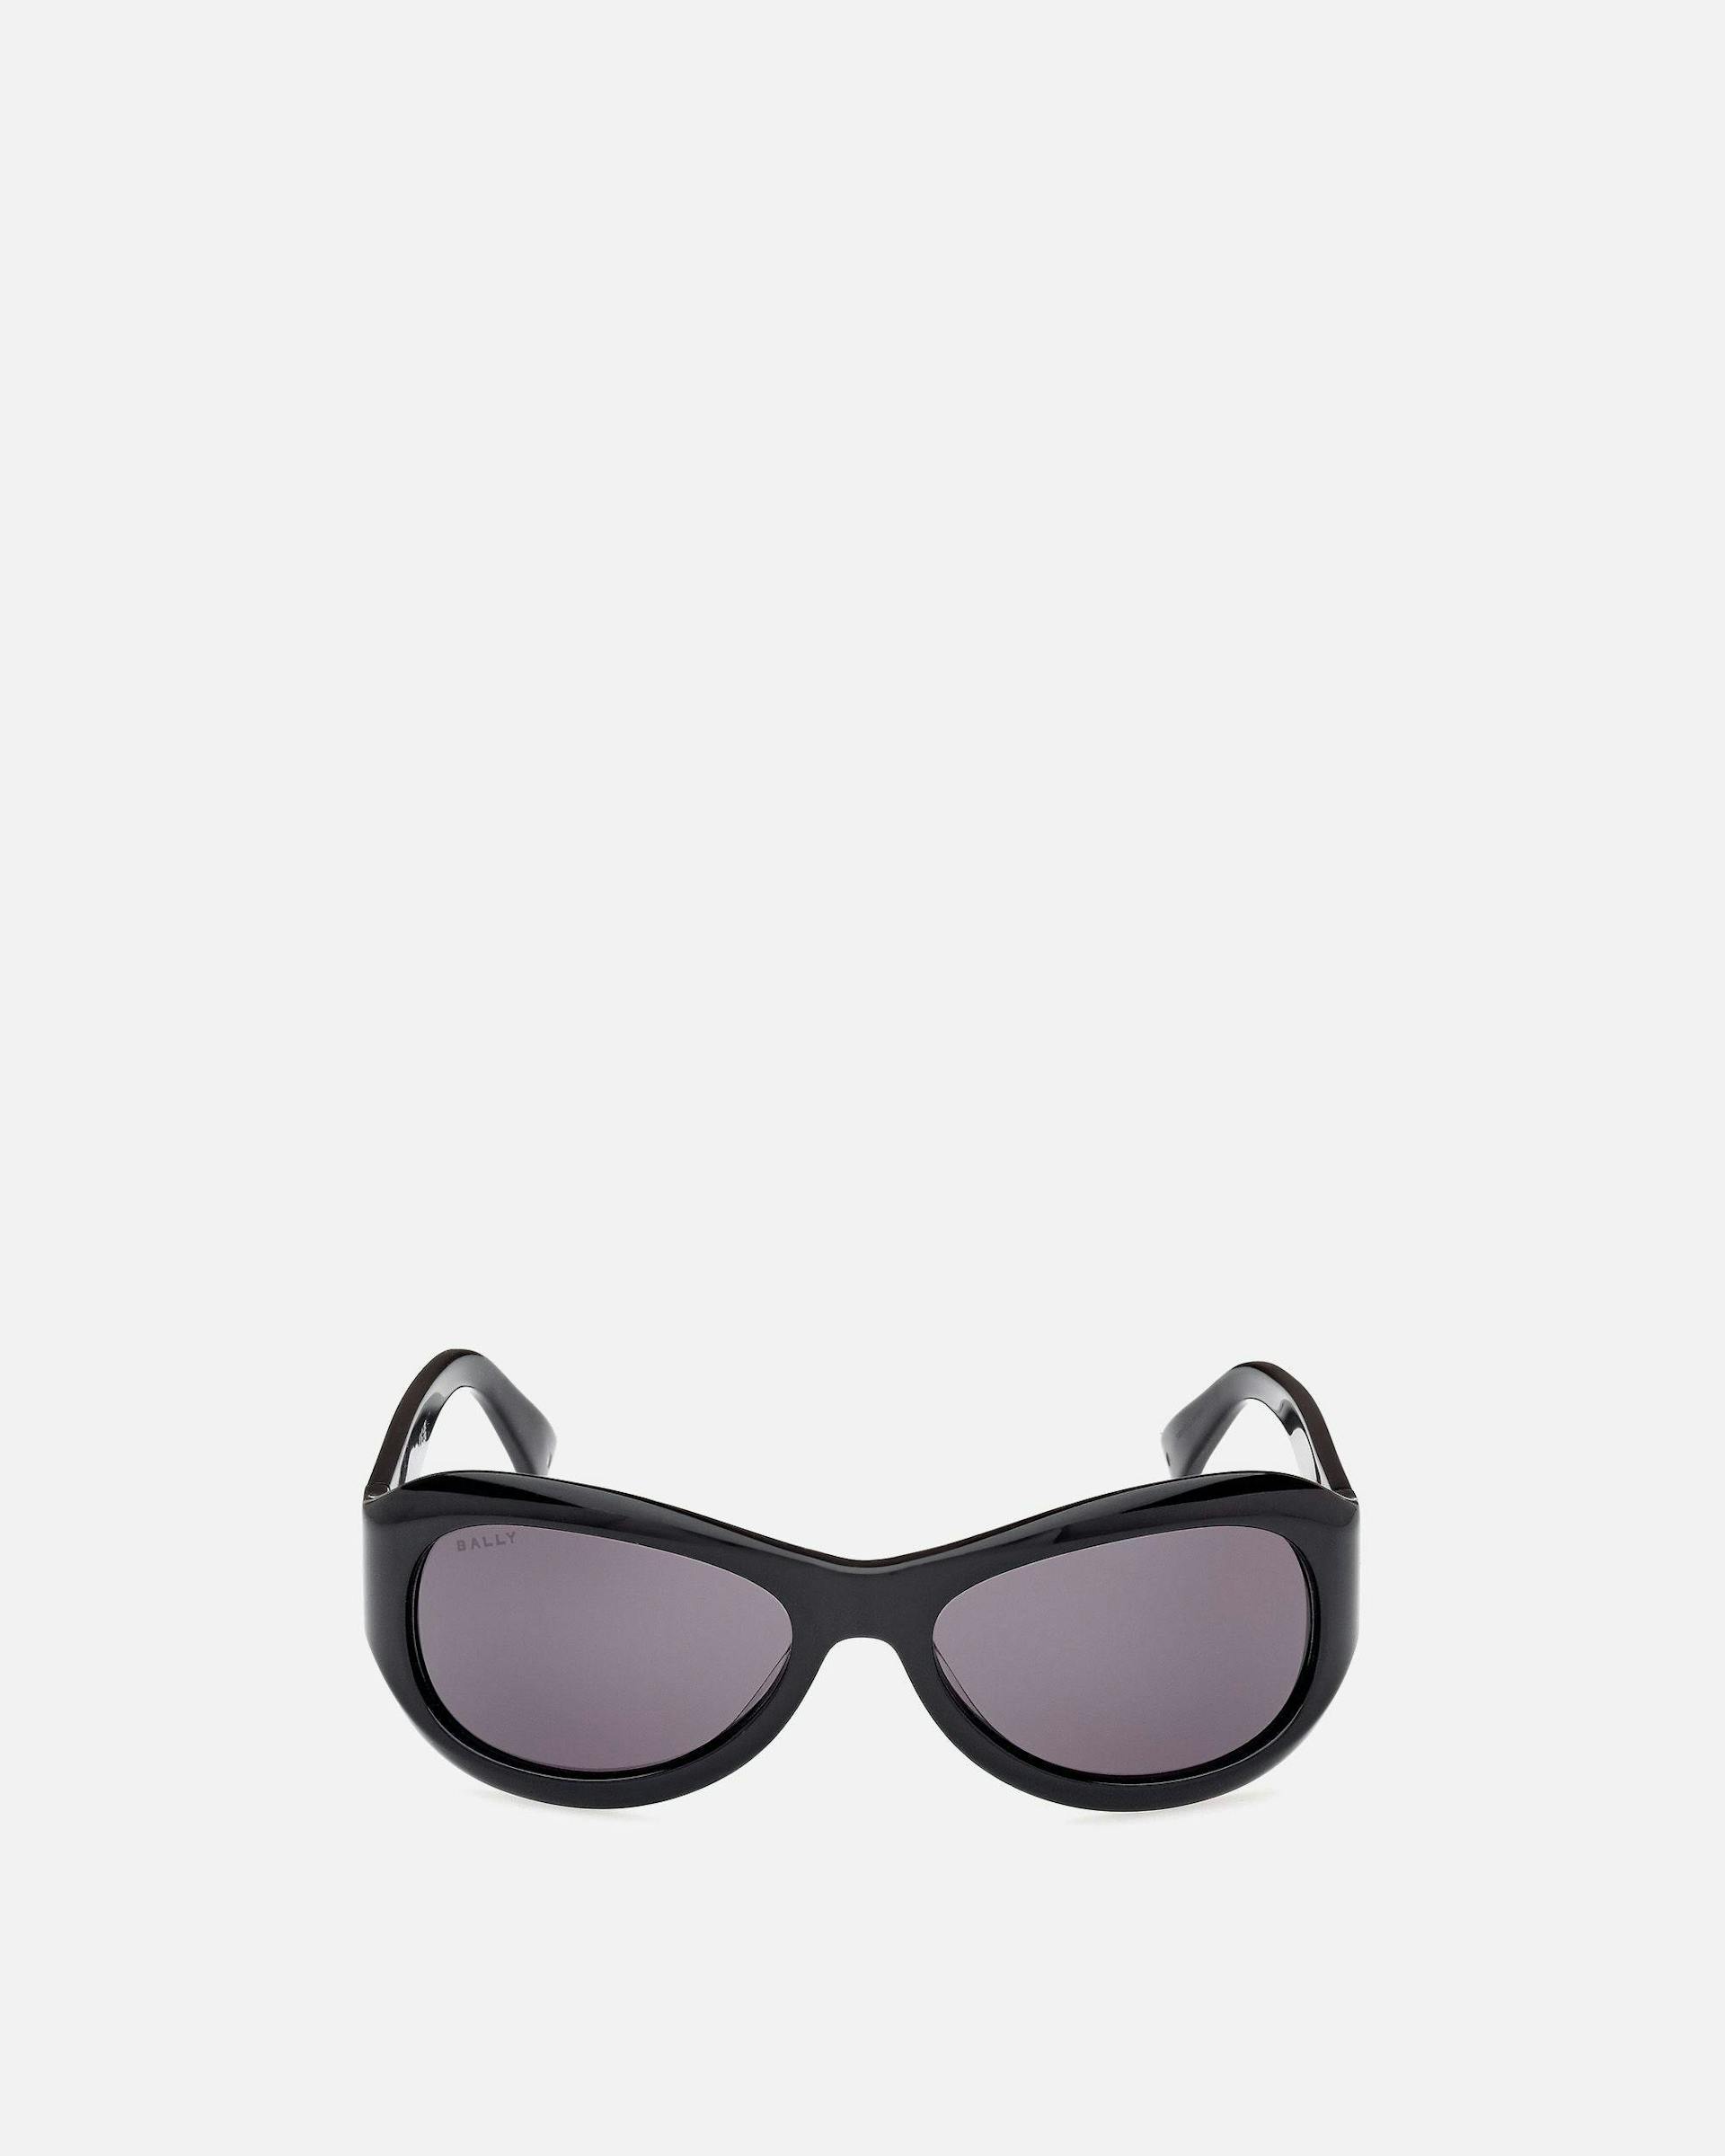 Maurice Acetate Sunglasses in Black and Smoke | Bally | Still Life Front